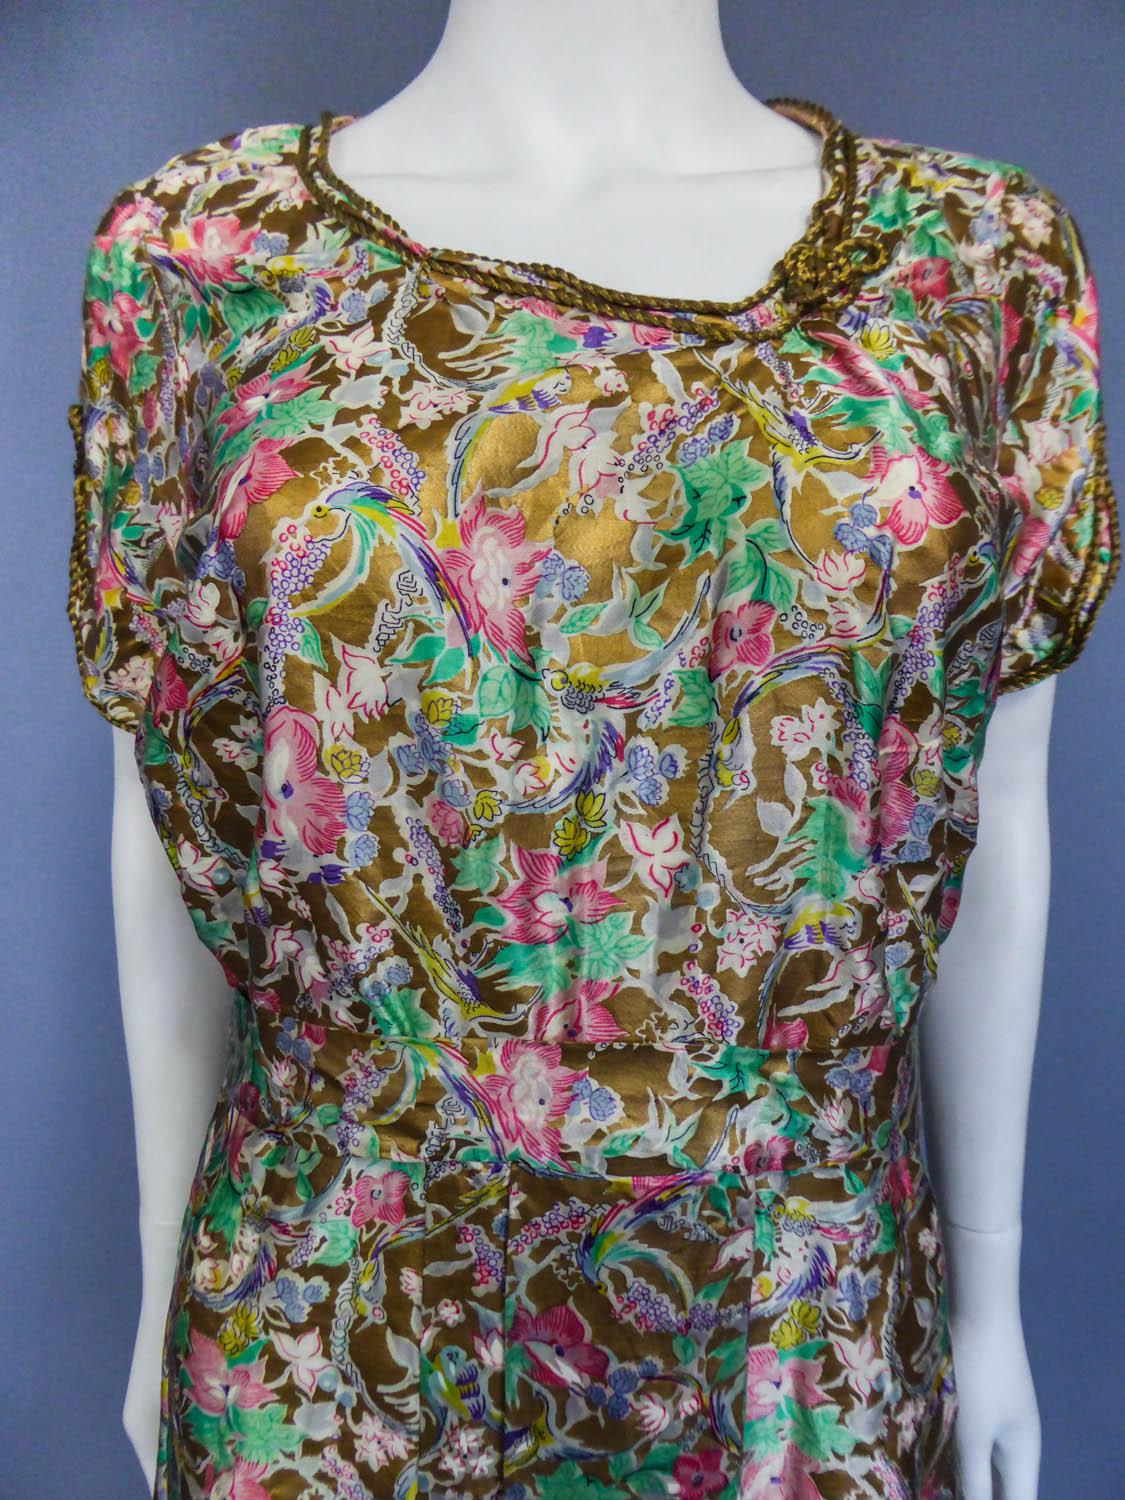 Circa 1940-1950
Europe

Amazing little summer dress with flowers on a gold background dating very propably from the Second World War. Clever print on silk satin cream with surreal patterns popular in the 1940s thanks to Elsa Schiaparelli ... Fish,